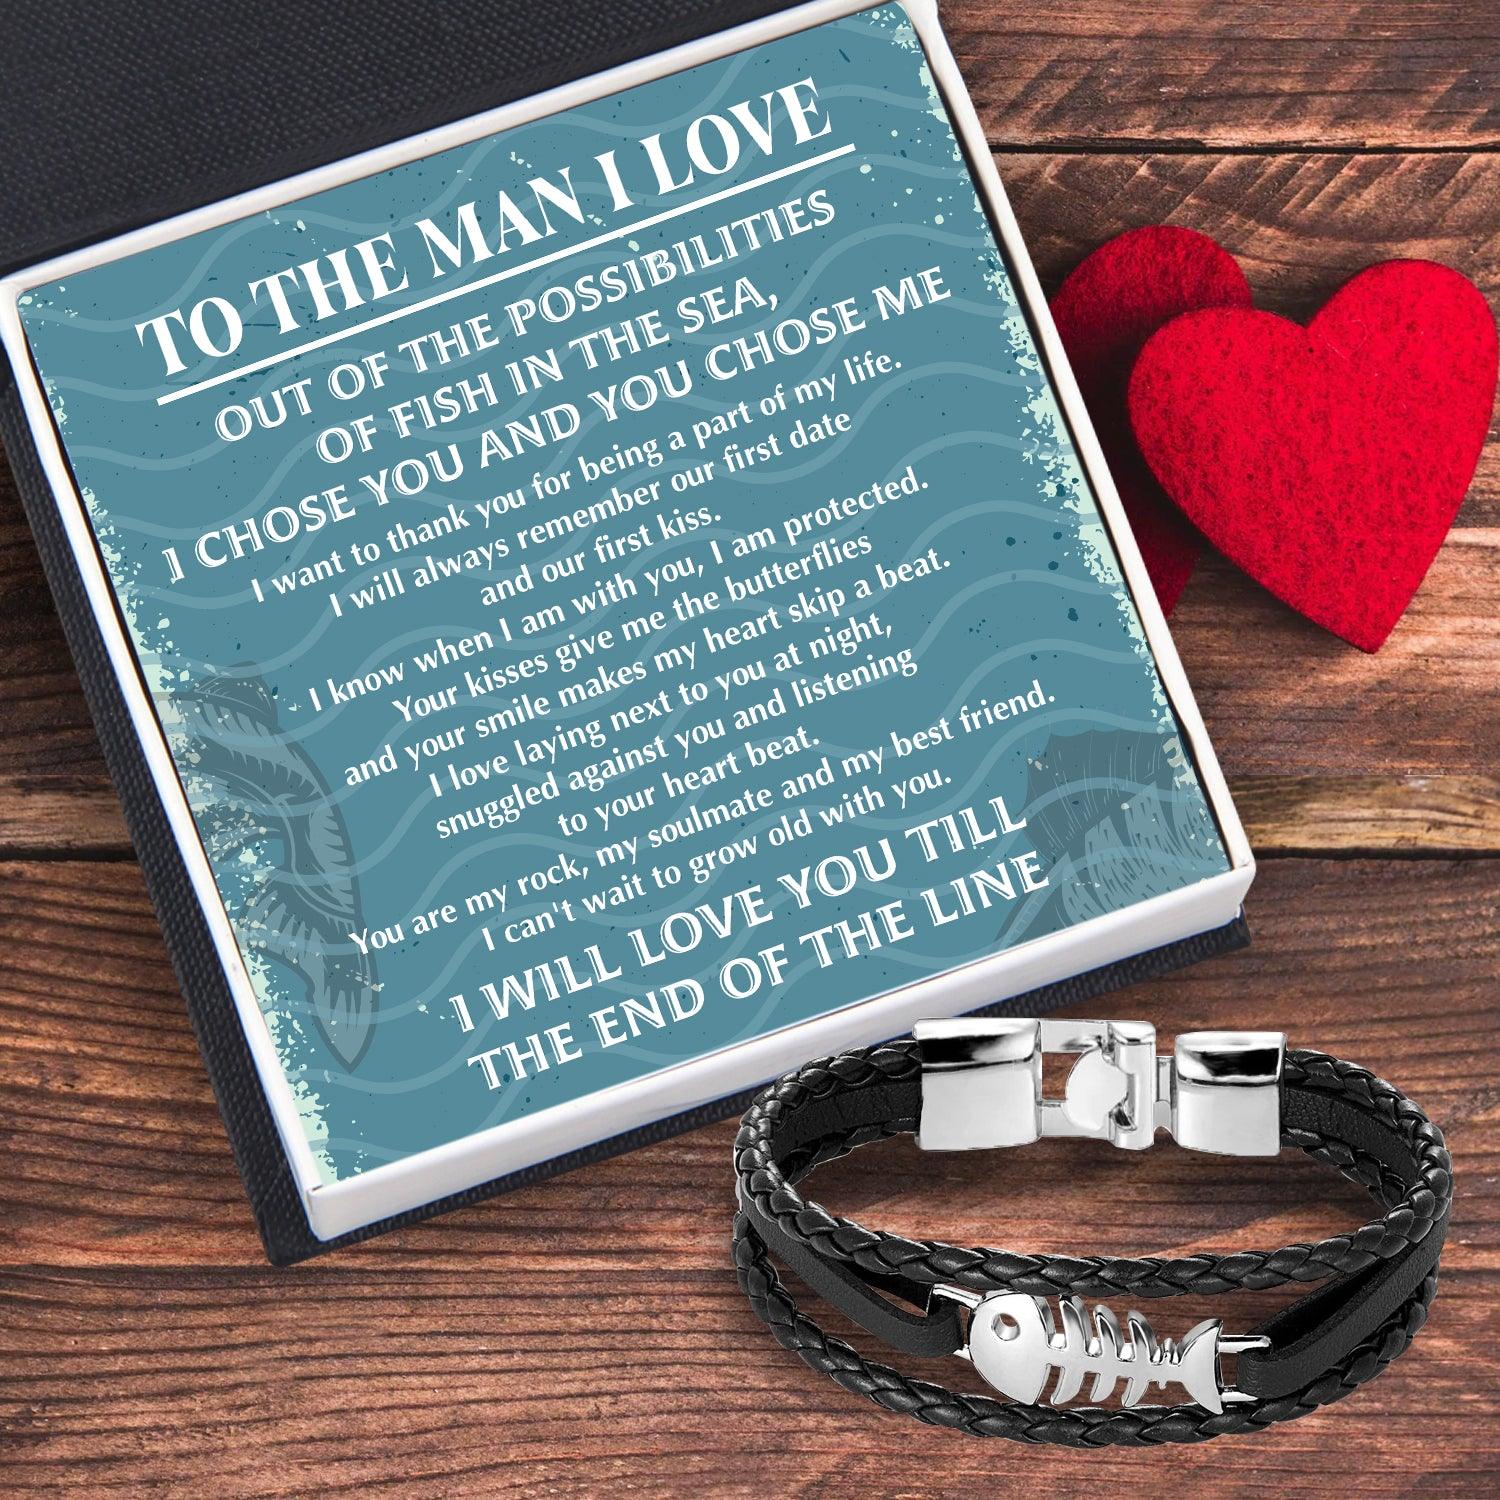 Fish Leather Bracelet - Fishing - To The Man I Love - You Are My Rock - Augbzp14002 - Gifts Holder